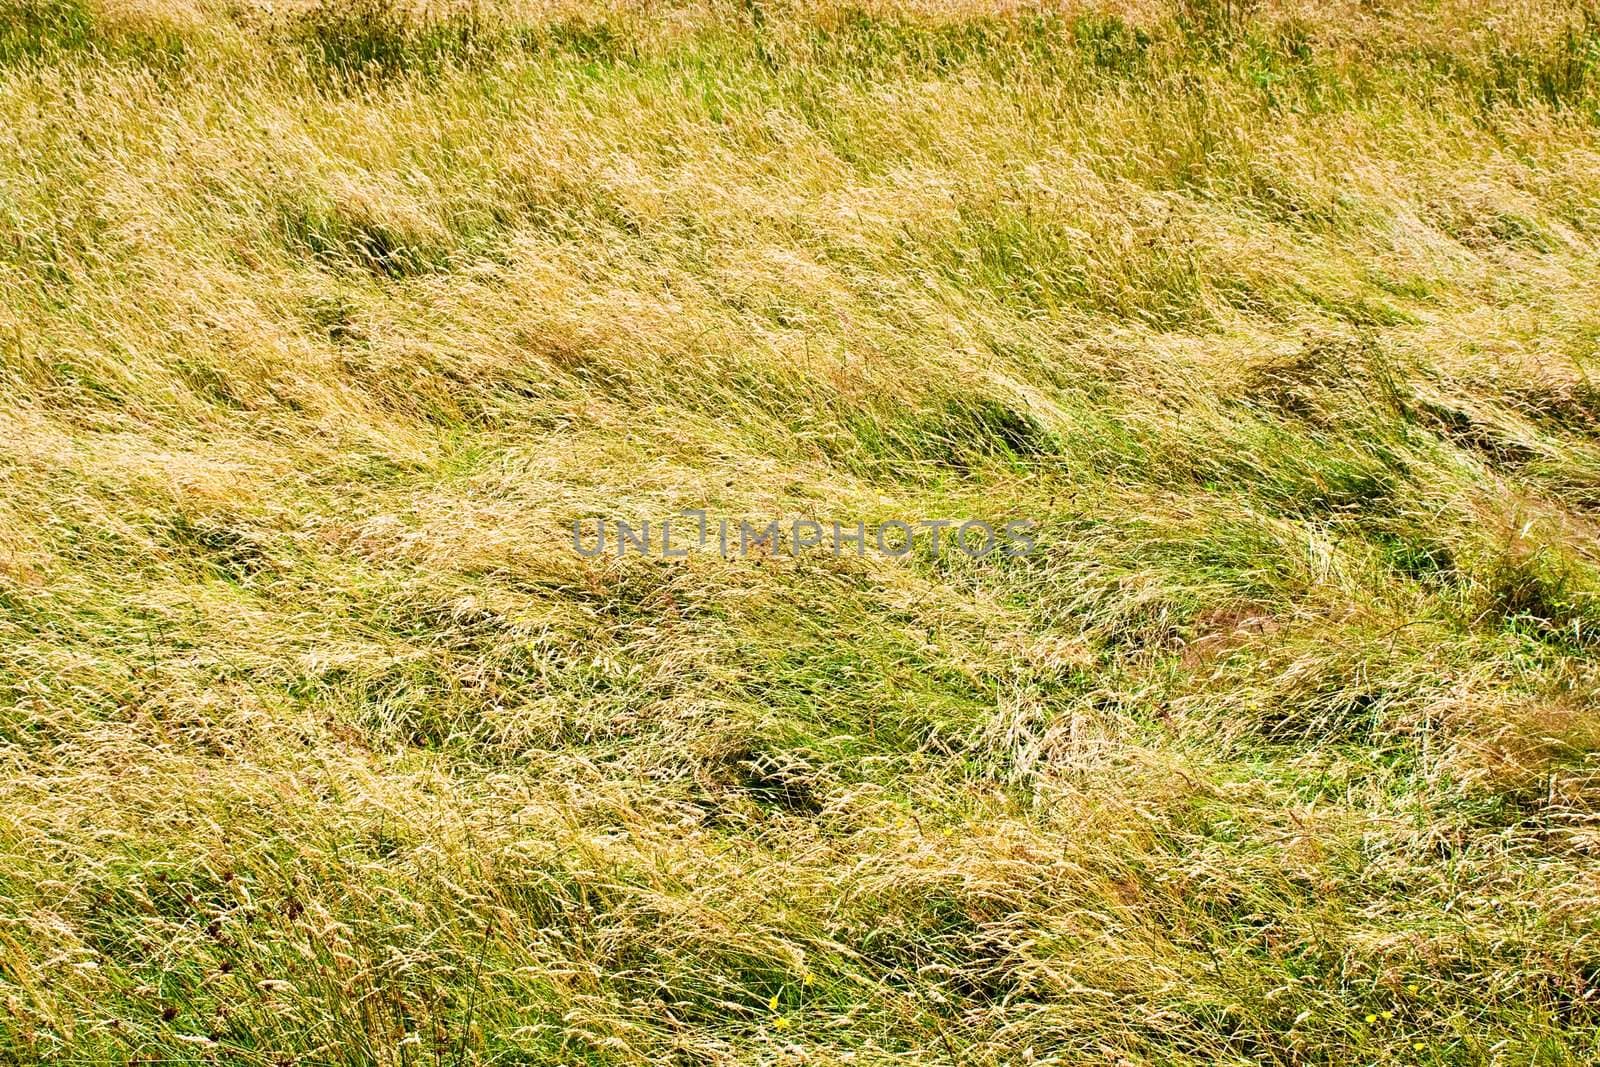 A field of tall green and golden grass filling the entire frame